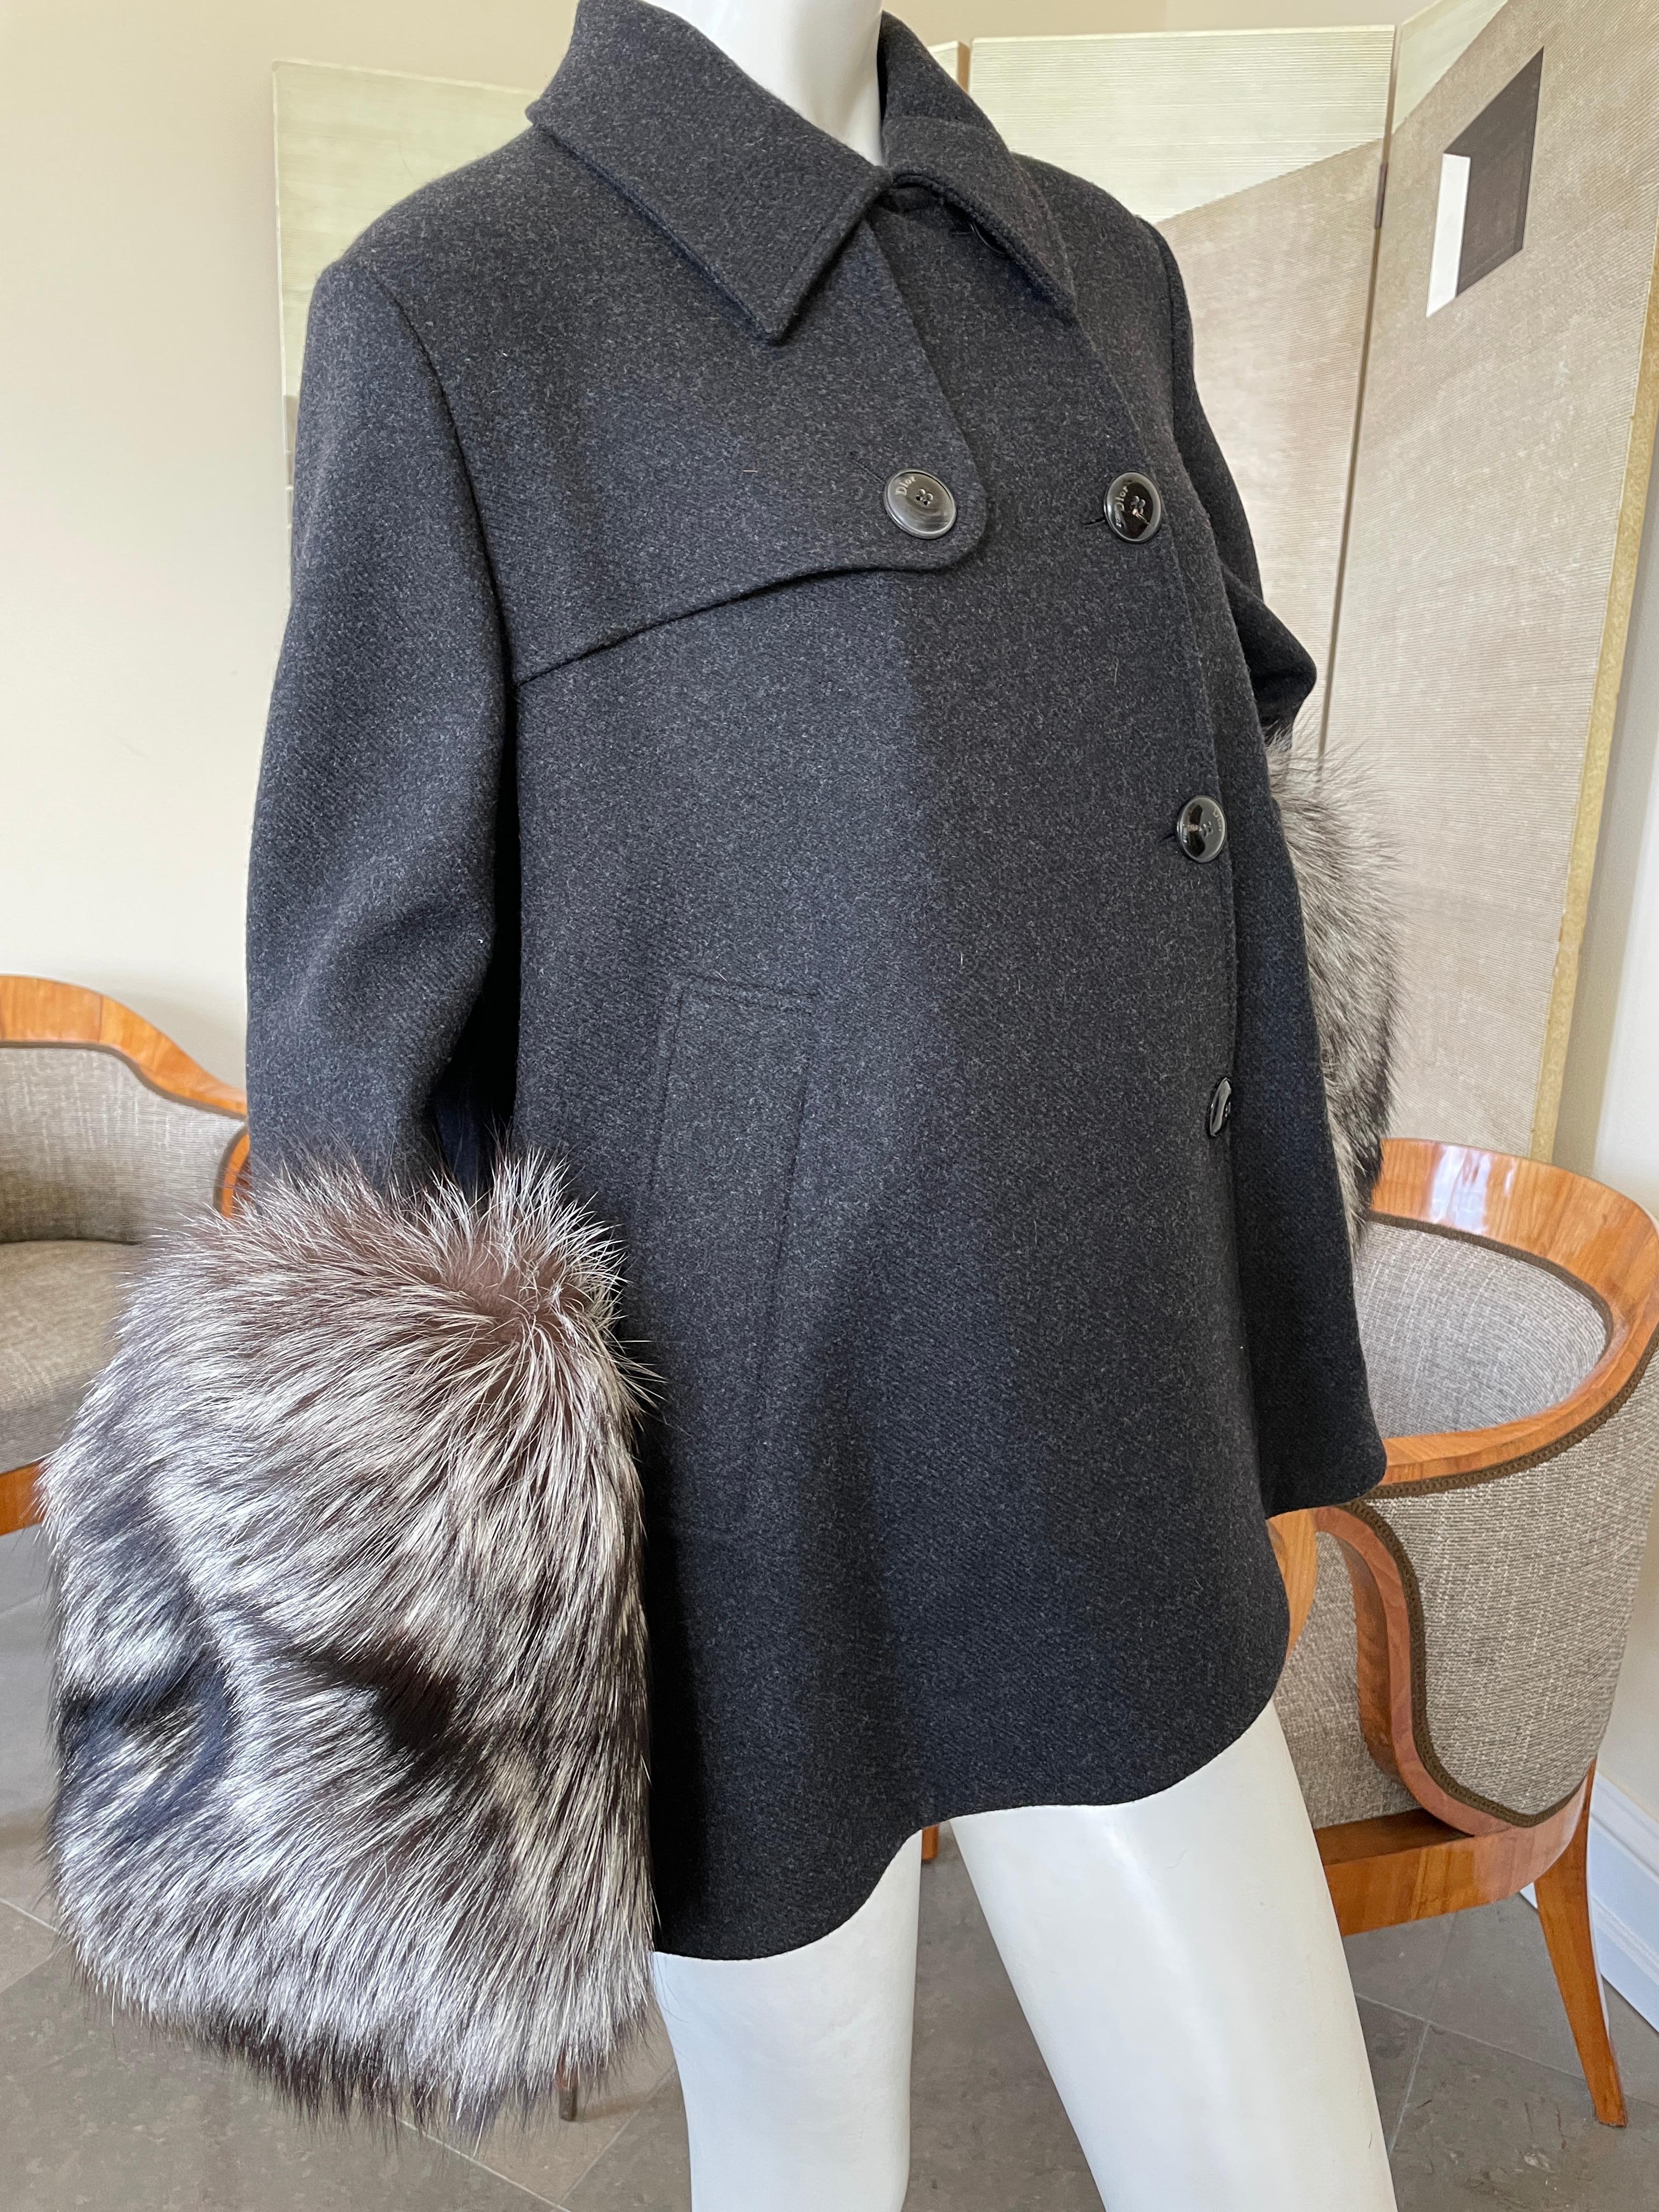 Women's Christian Dior by Gianfranco Ferre Gray Peacoat with Fox Fur Cuffs For Sale